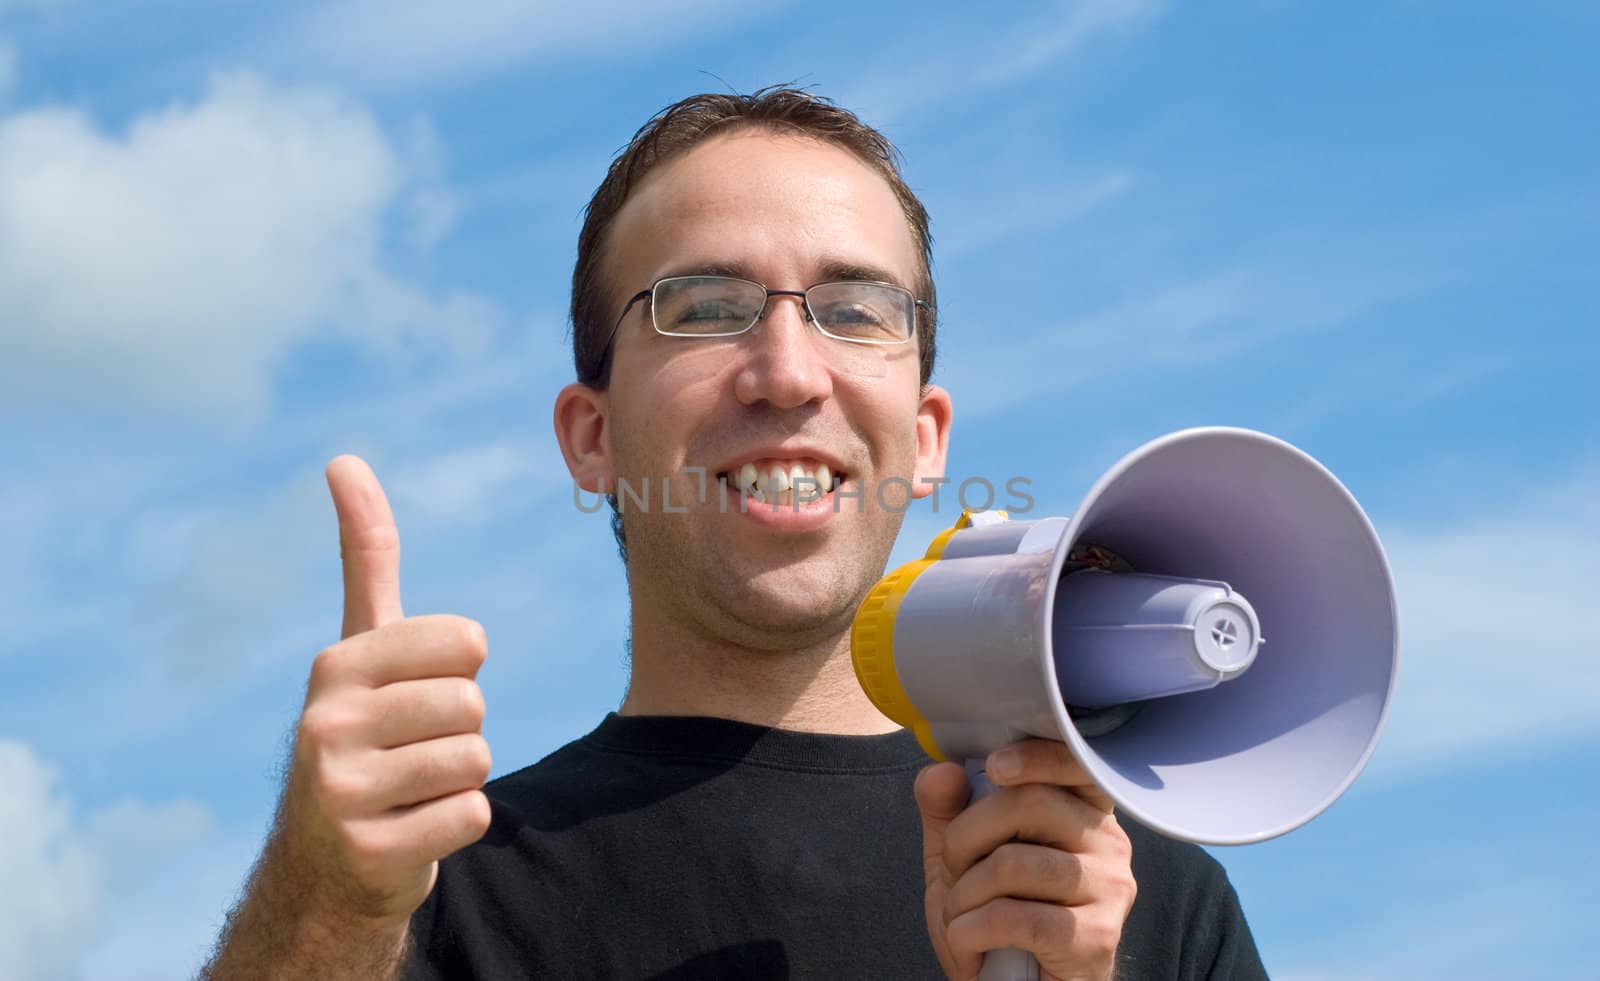 A young man holding a megaphone giving a thumbs up signal, with blue sky and clouds behind him